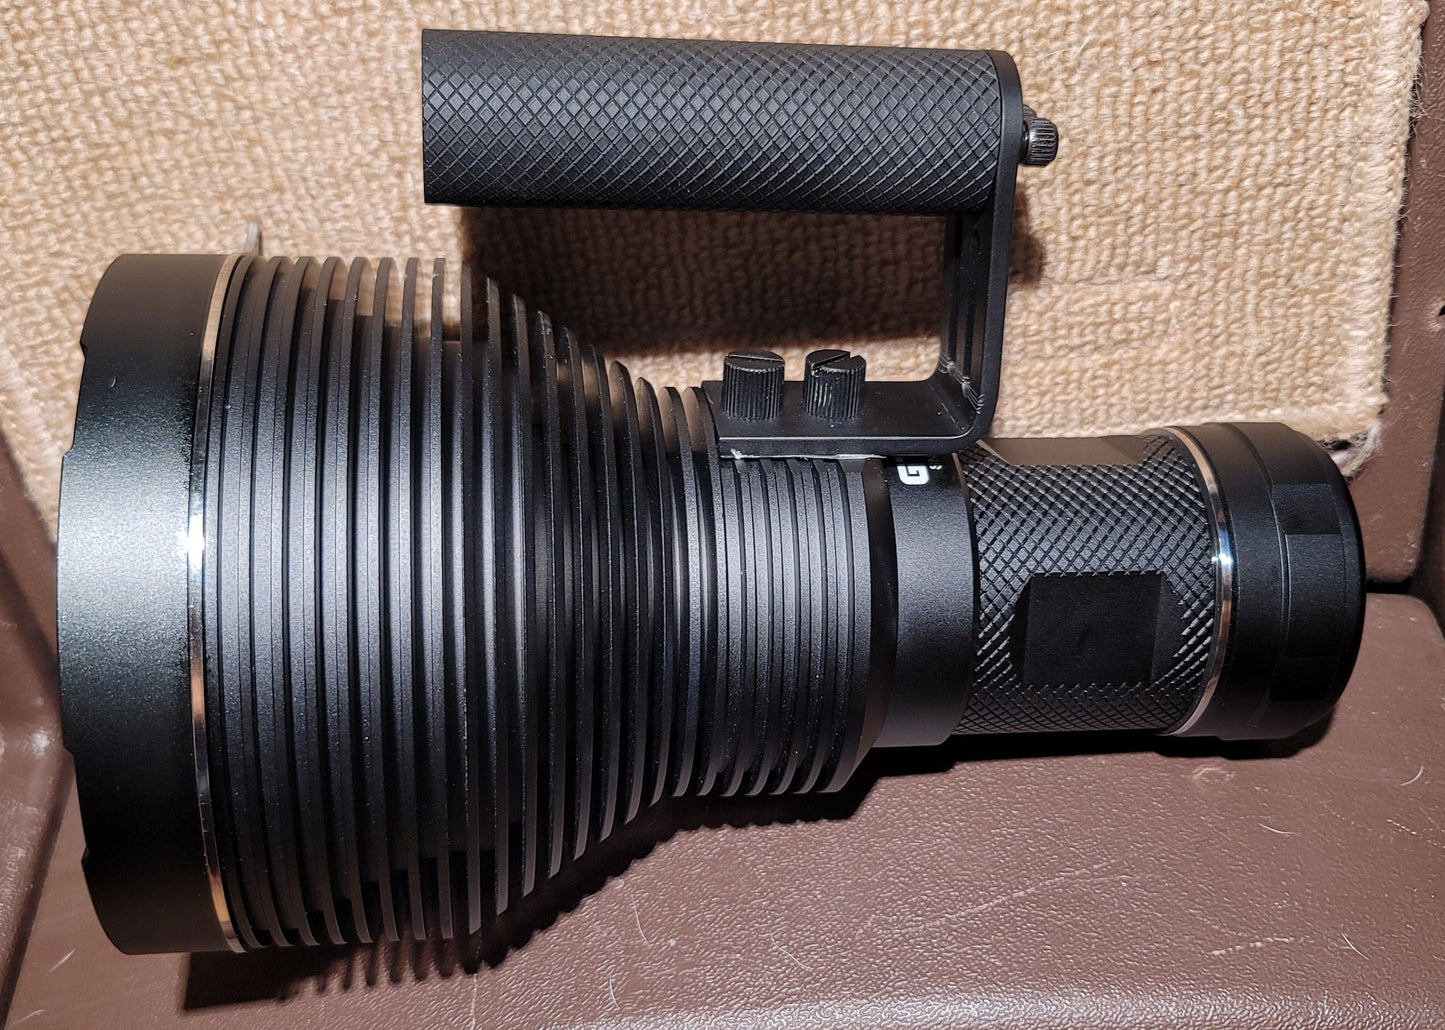 Lumintop BLF GT94X 4 X SBT90.2 LED 24,000 Lumens 2950 Meters 21700 LED Flashlight/Searchlight DISCOUNTED BLF GT94X DAMAGED FROM SHIPPING $100/OFF (NO BATTERIES)